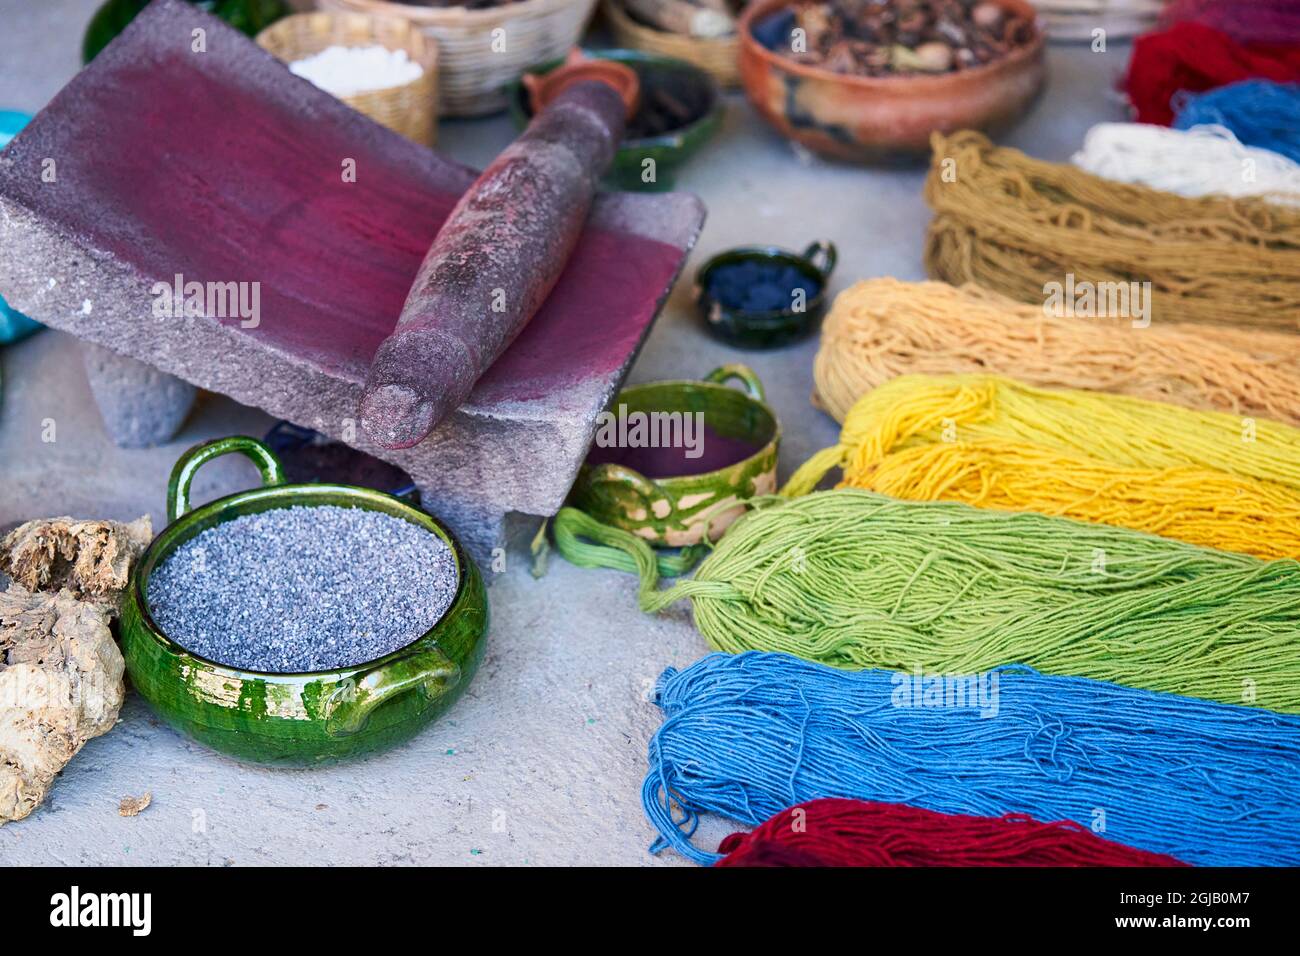 Mexico, Teotitlan del Valle. Home of rug weaver Eugenia Mendoza and her family use natural dyes from local plants and minerals to create their traditi Stock Photo